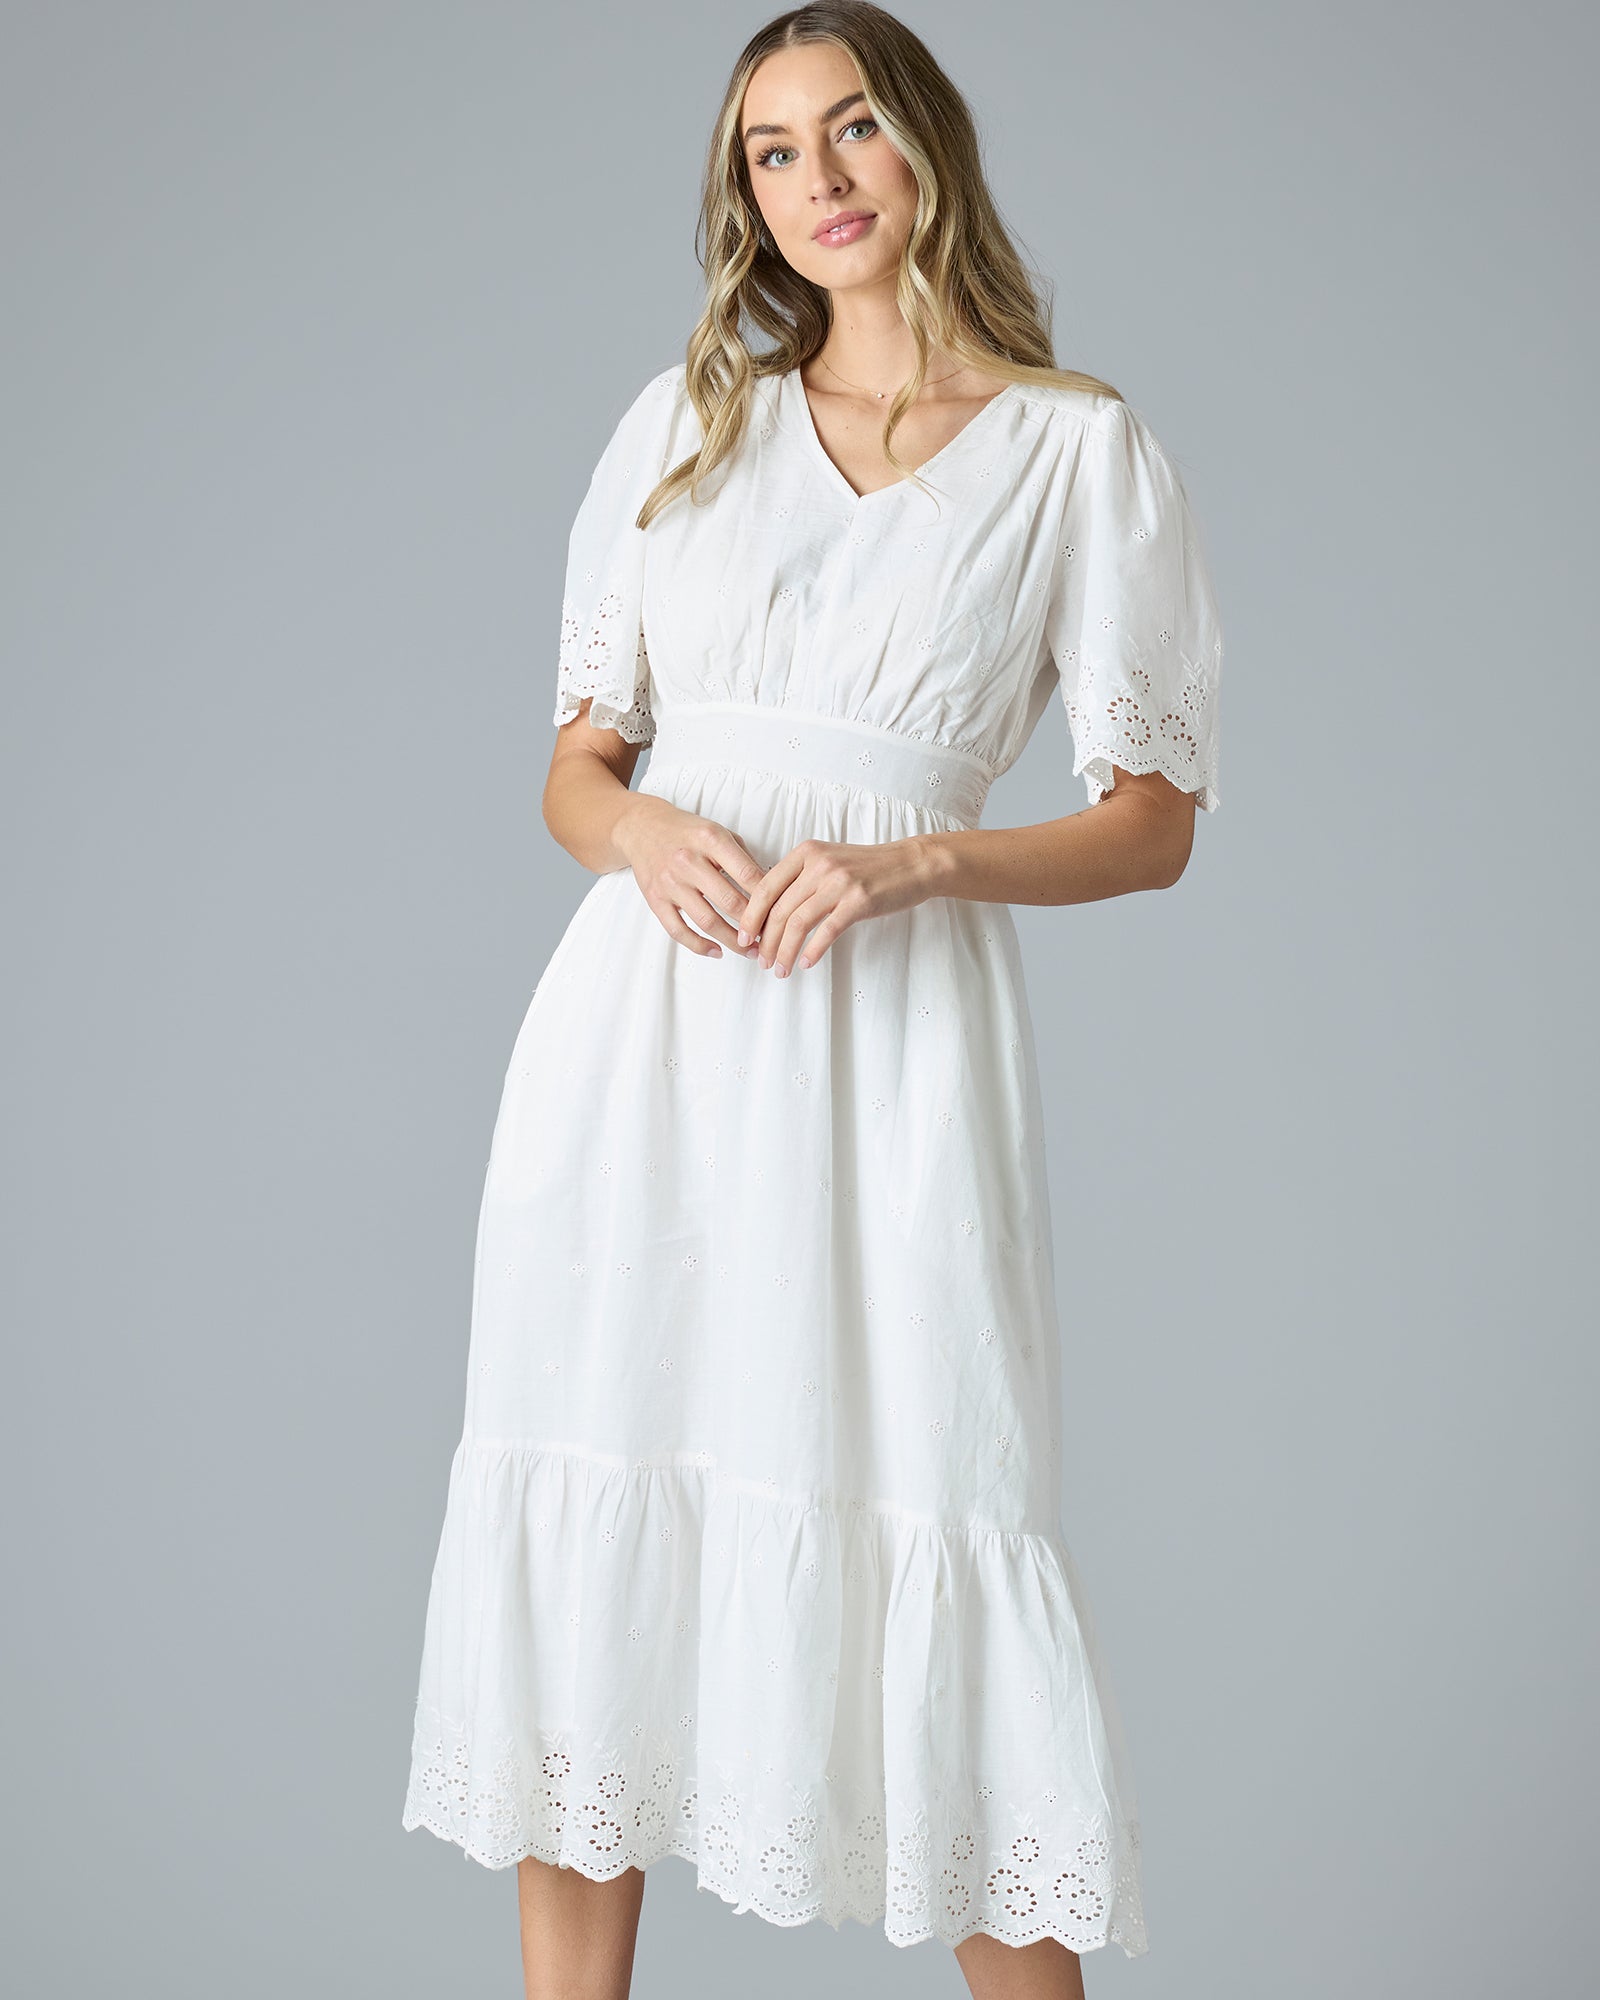 Woman in a white short sleeve, midi-length dress with eyelet details on hem